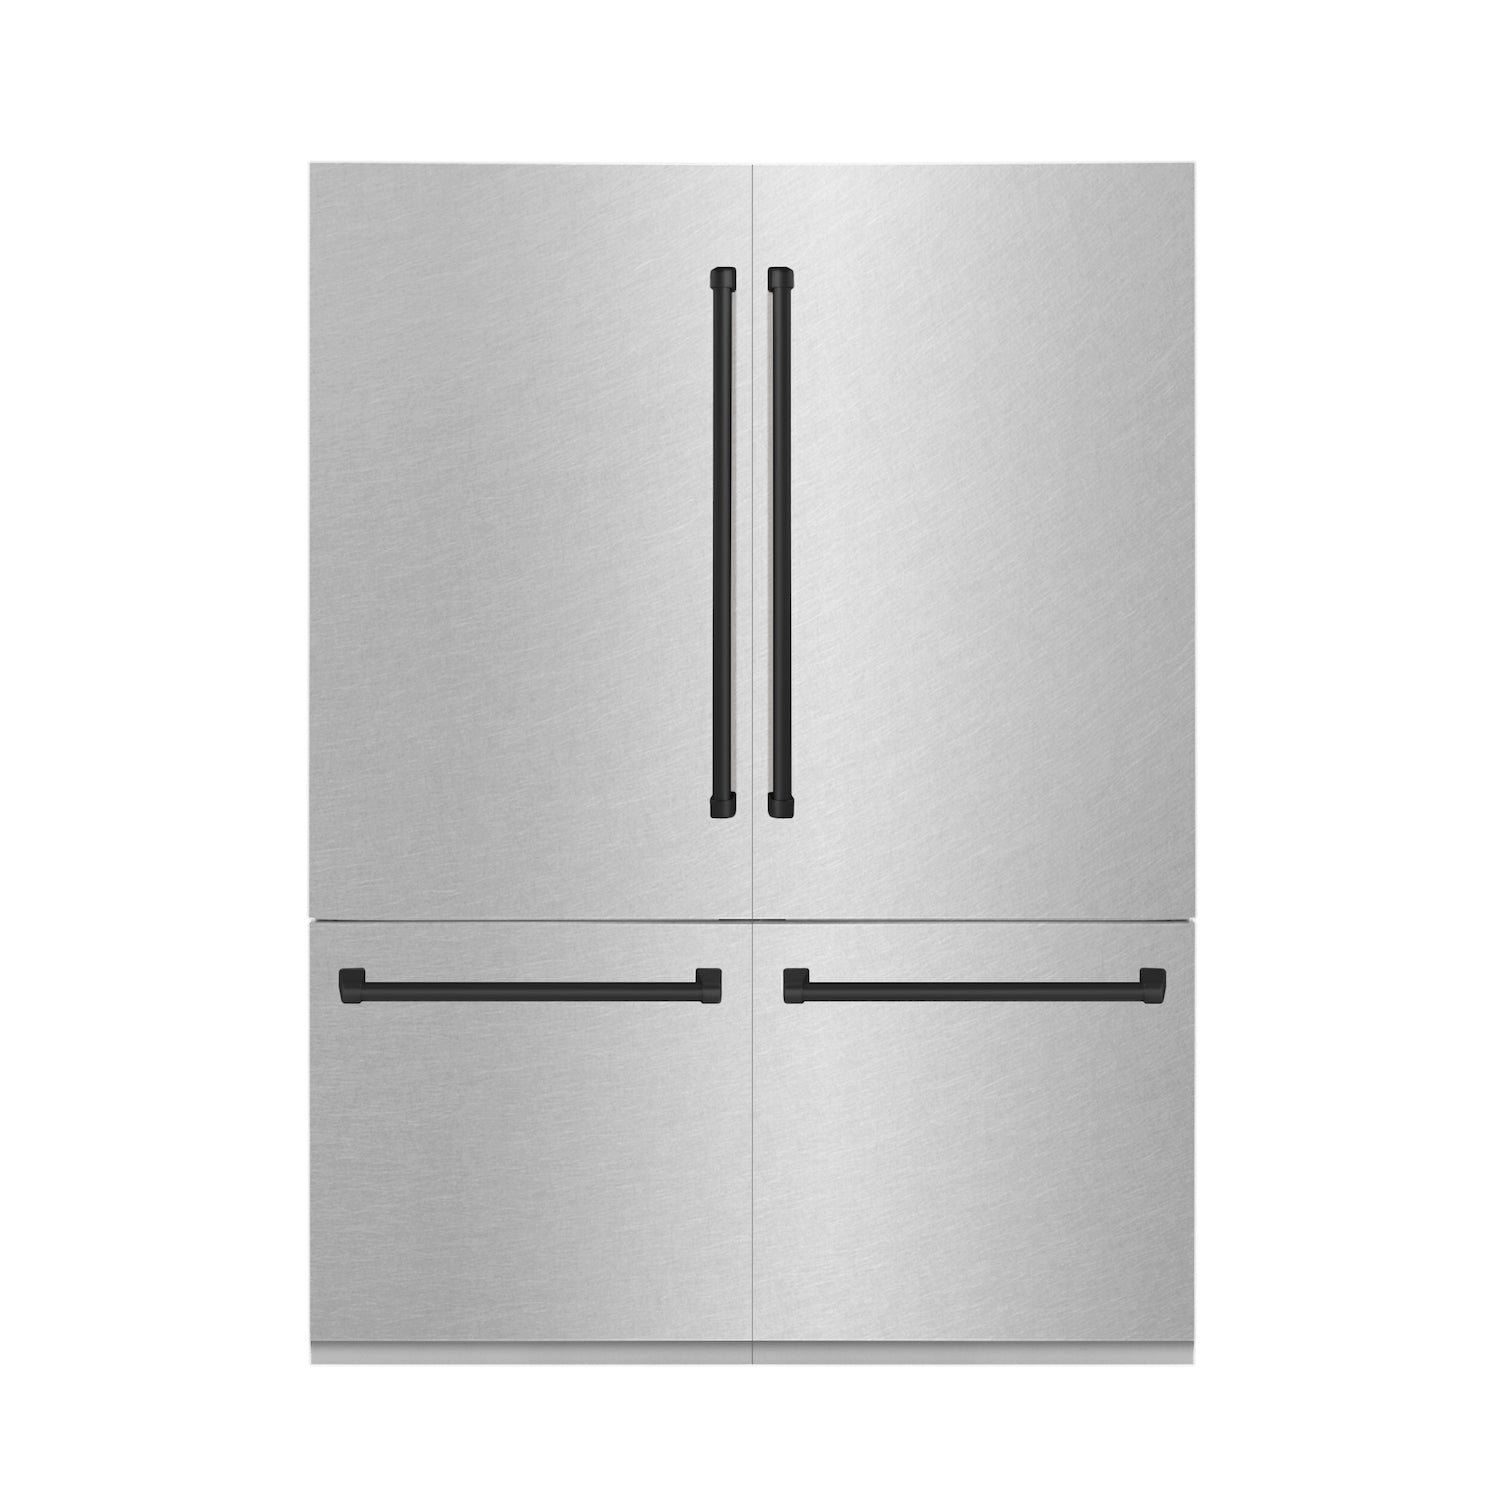 ZLINE Autograph Edition 60 in. 32.2 cu. ft. Built-in 4-Door French Door Refrigerator with Internal Water and Ice Dispenser in Fingerprint Resistant Stainless Steel with Matte Black Accents (RBIVZ-SN-60-MB) front, closed.